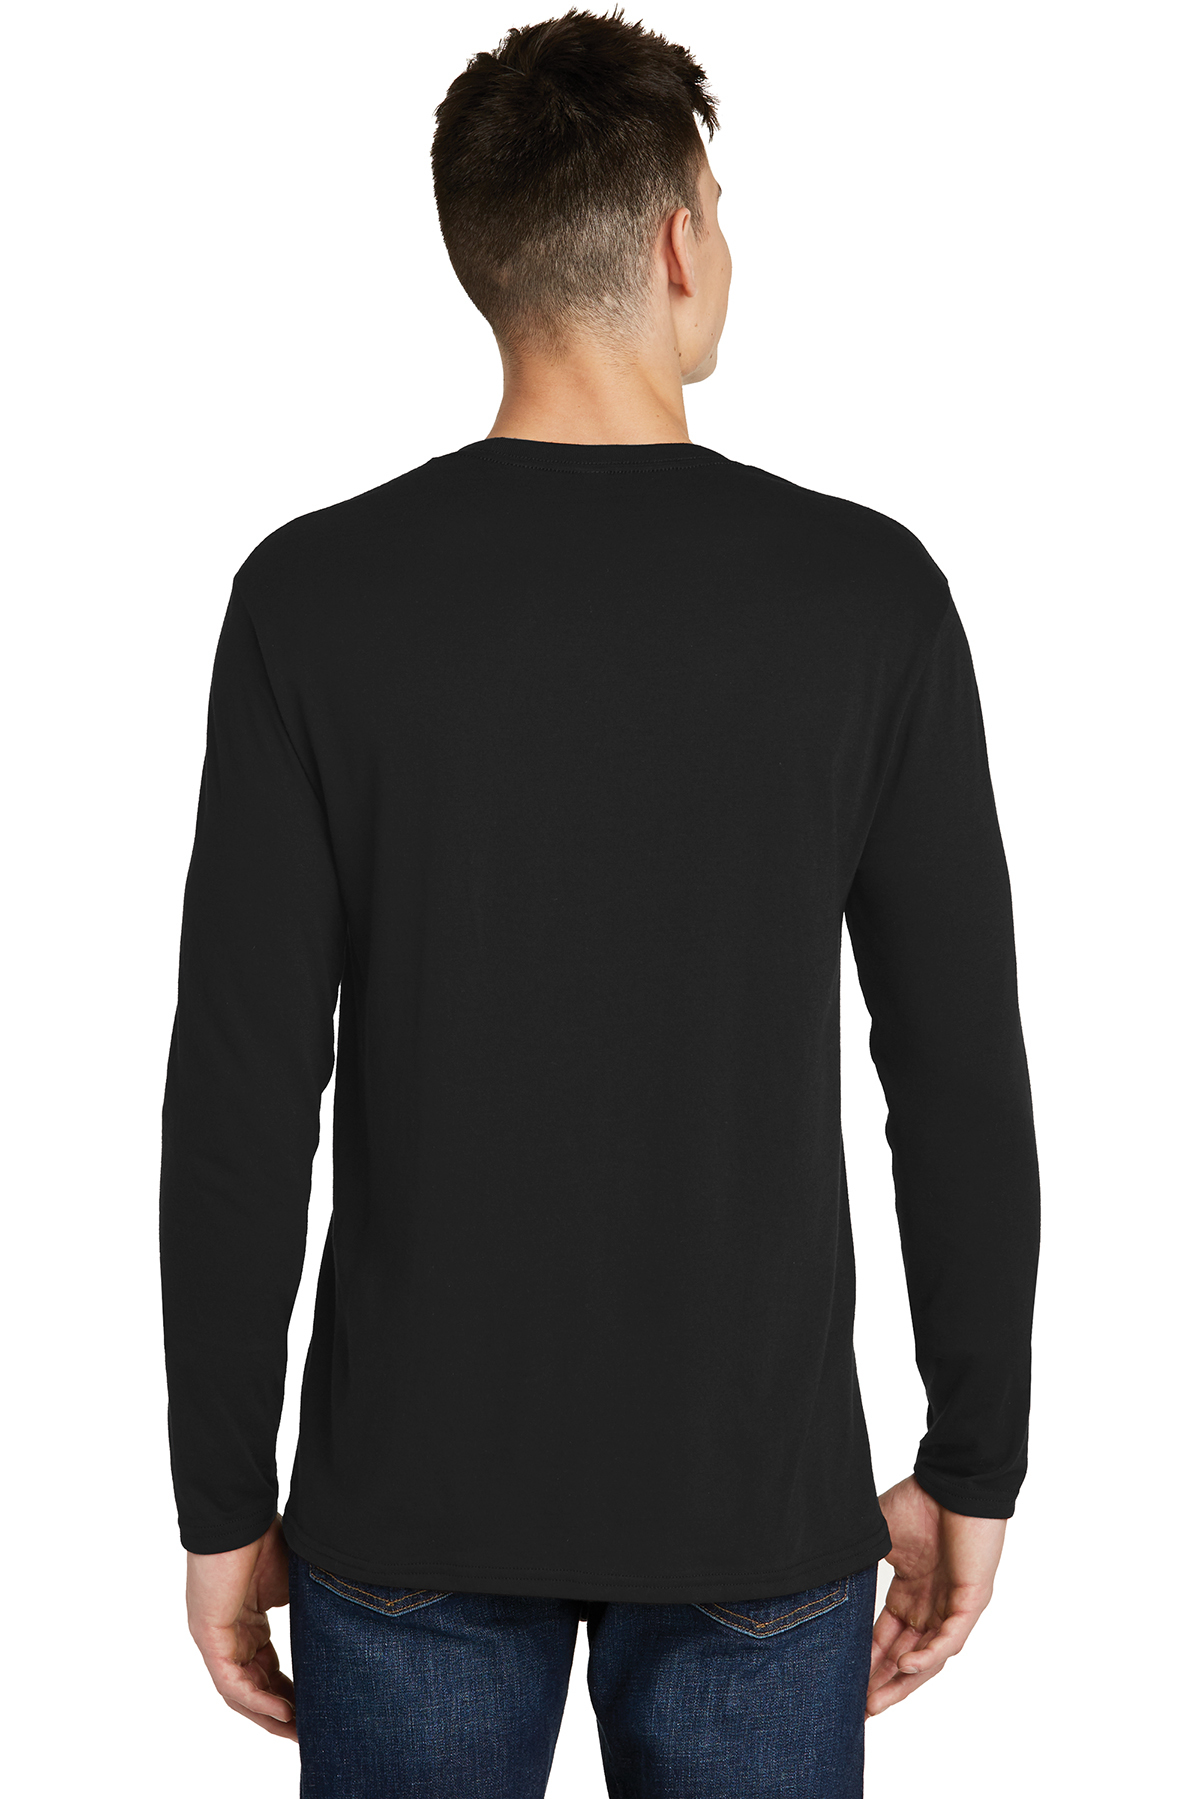 District ® Very Important Tee ® Long Sleeve | 50/50 Blend | T-Shirts ...